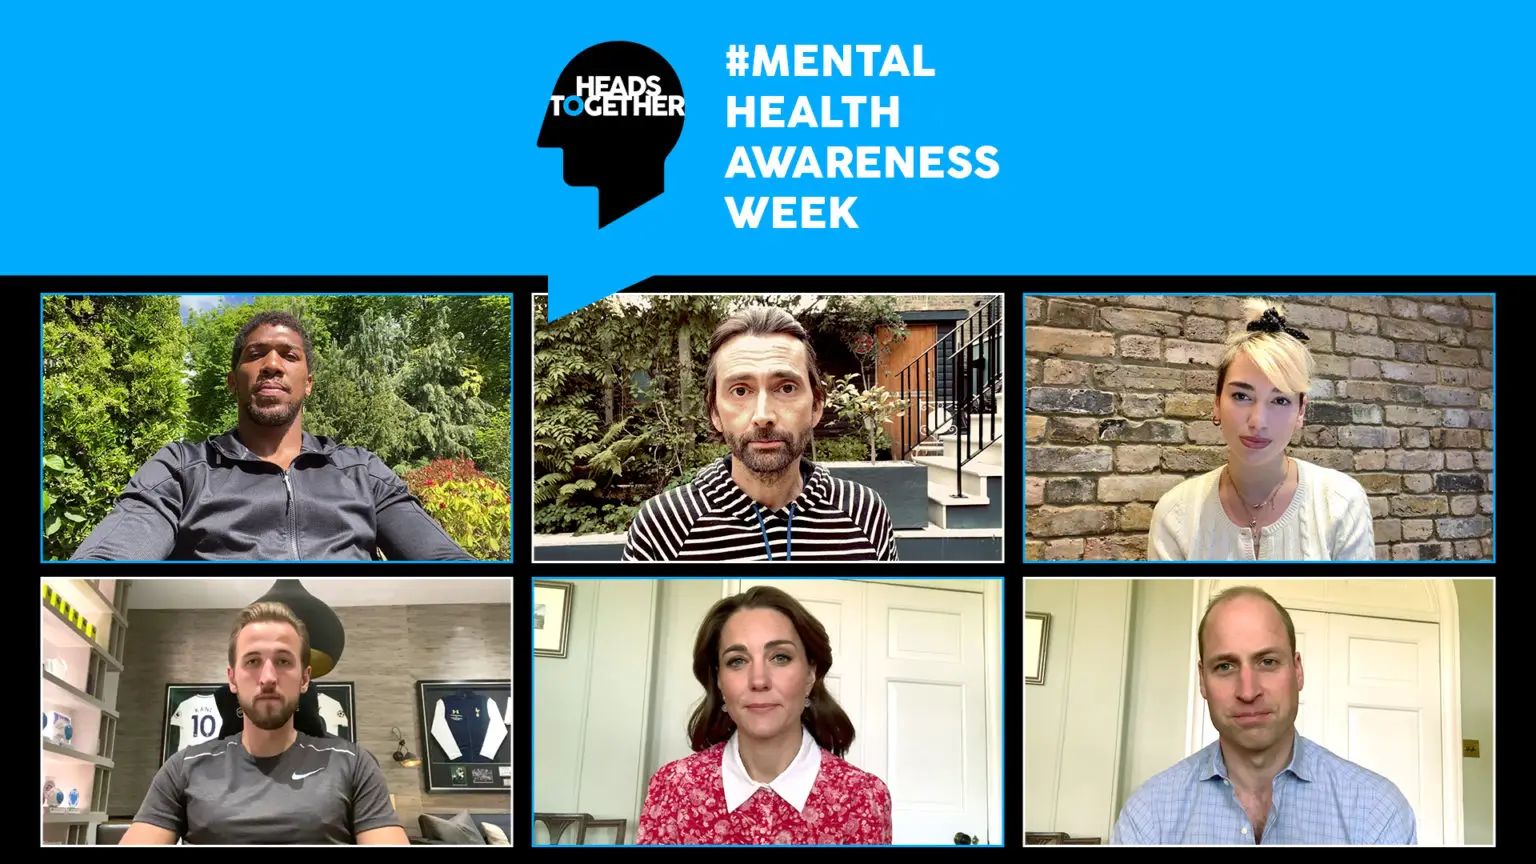 The Duke and Duchess of Cambridge recorded a special message for Mental health Awareness week